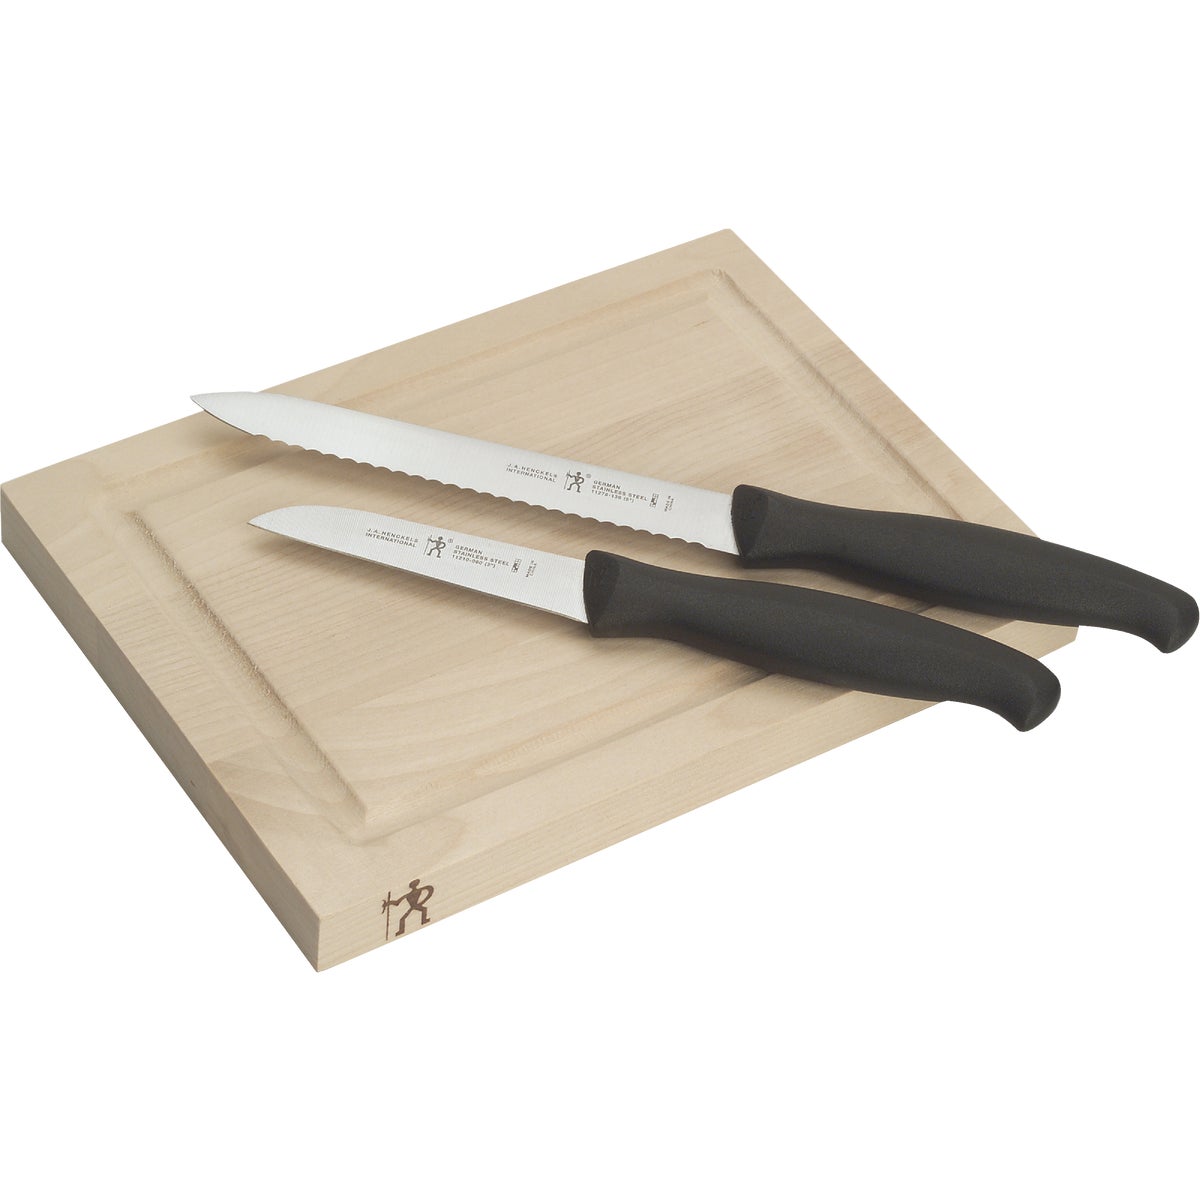 Item 603531, 3-piece bar knife and board set consists of: (1) 2.75 In.